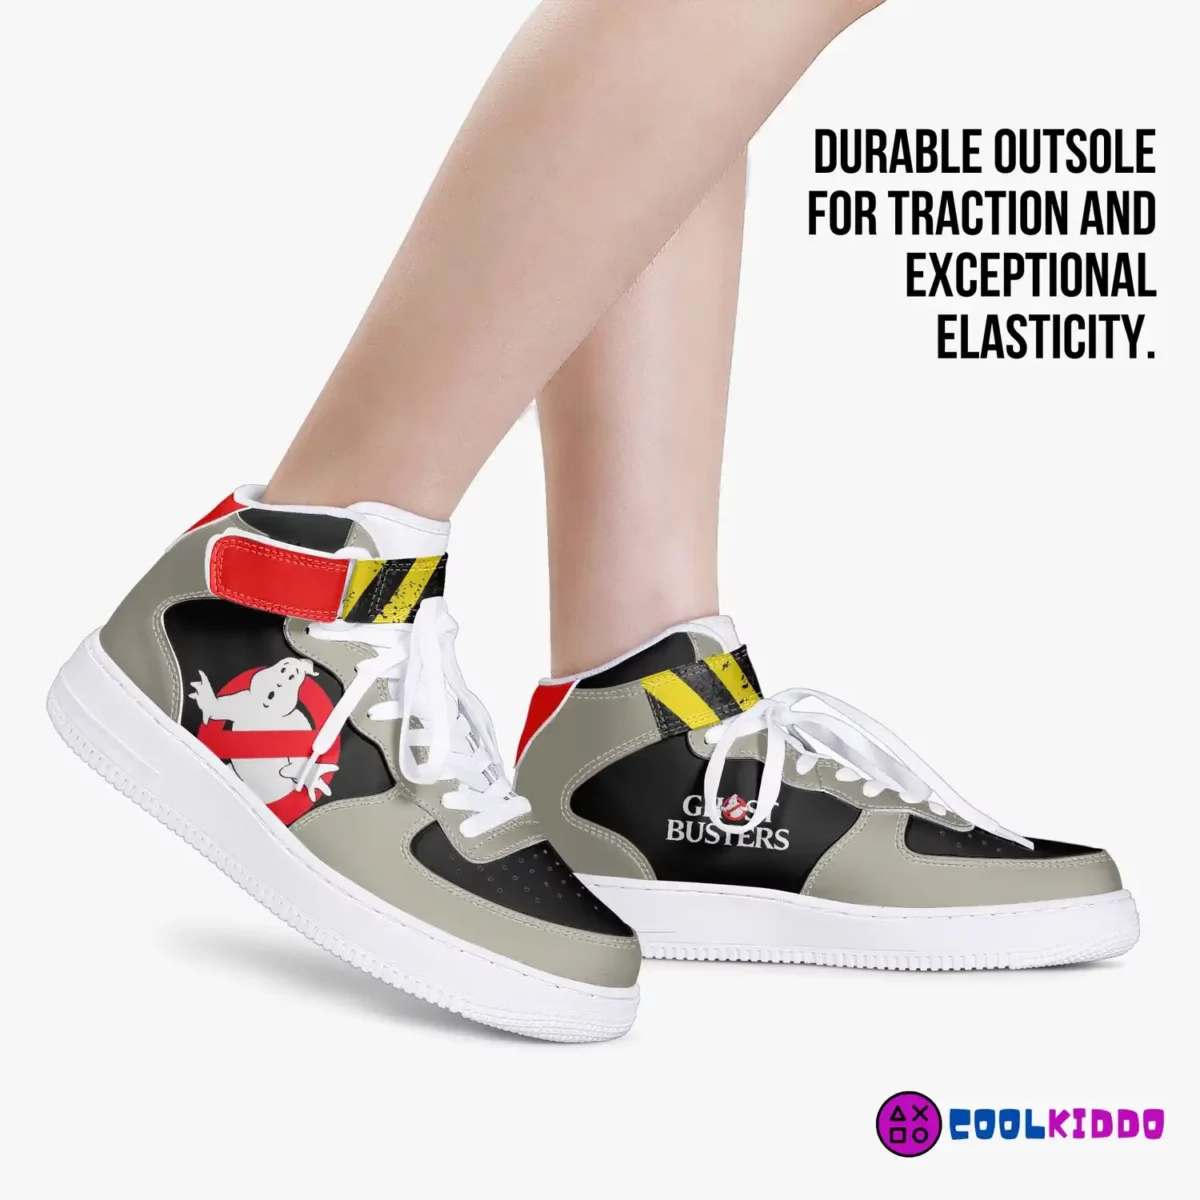 Custom GHOSTBUSTERS Air Force One Style High-Top Leather Sneakers – Casual Shoes for Youth/Adults Cool Kiddo 16